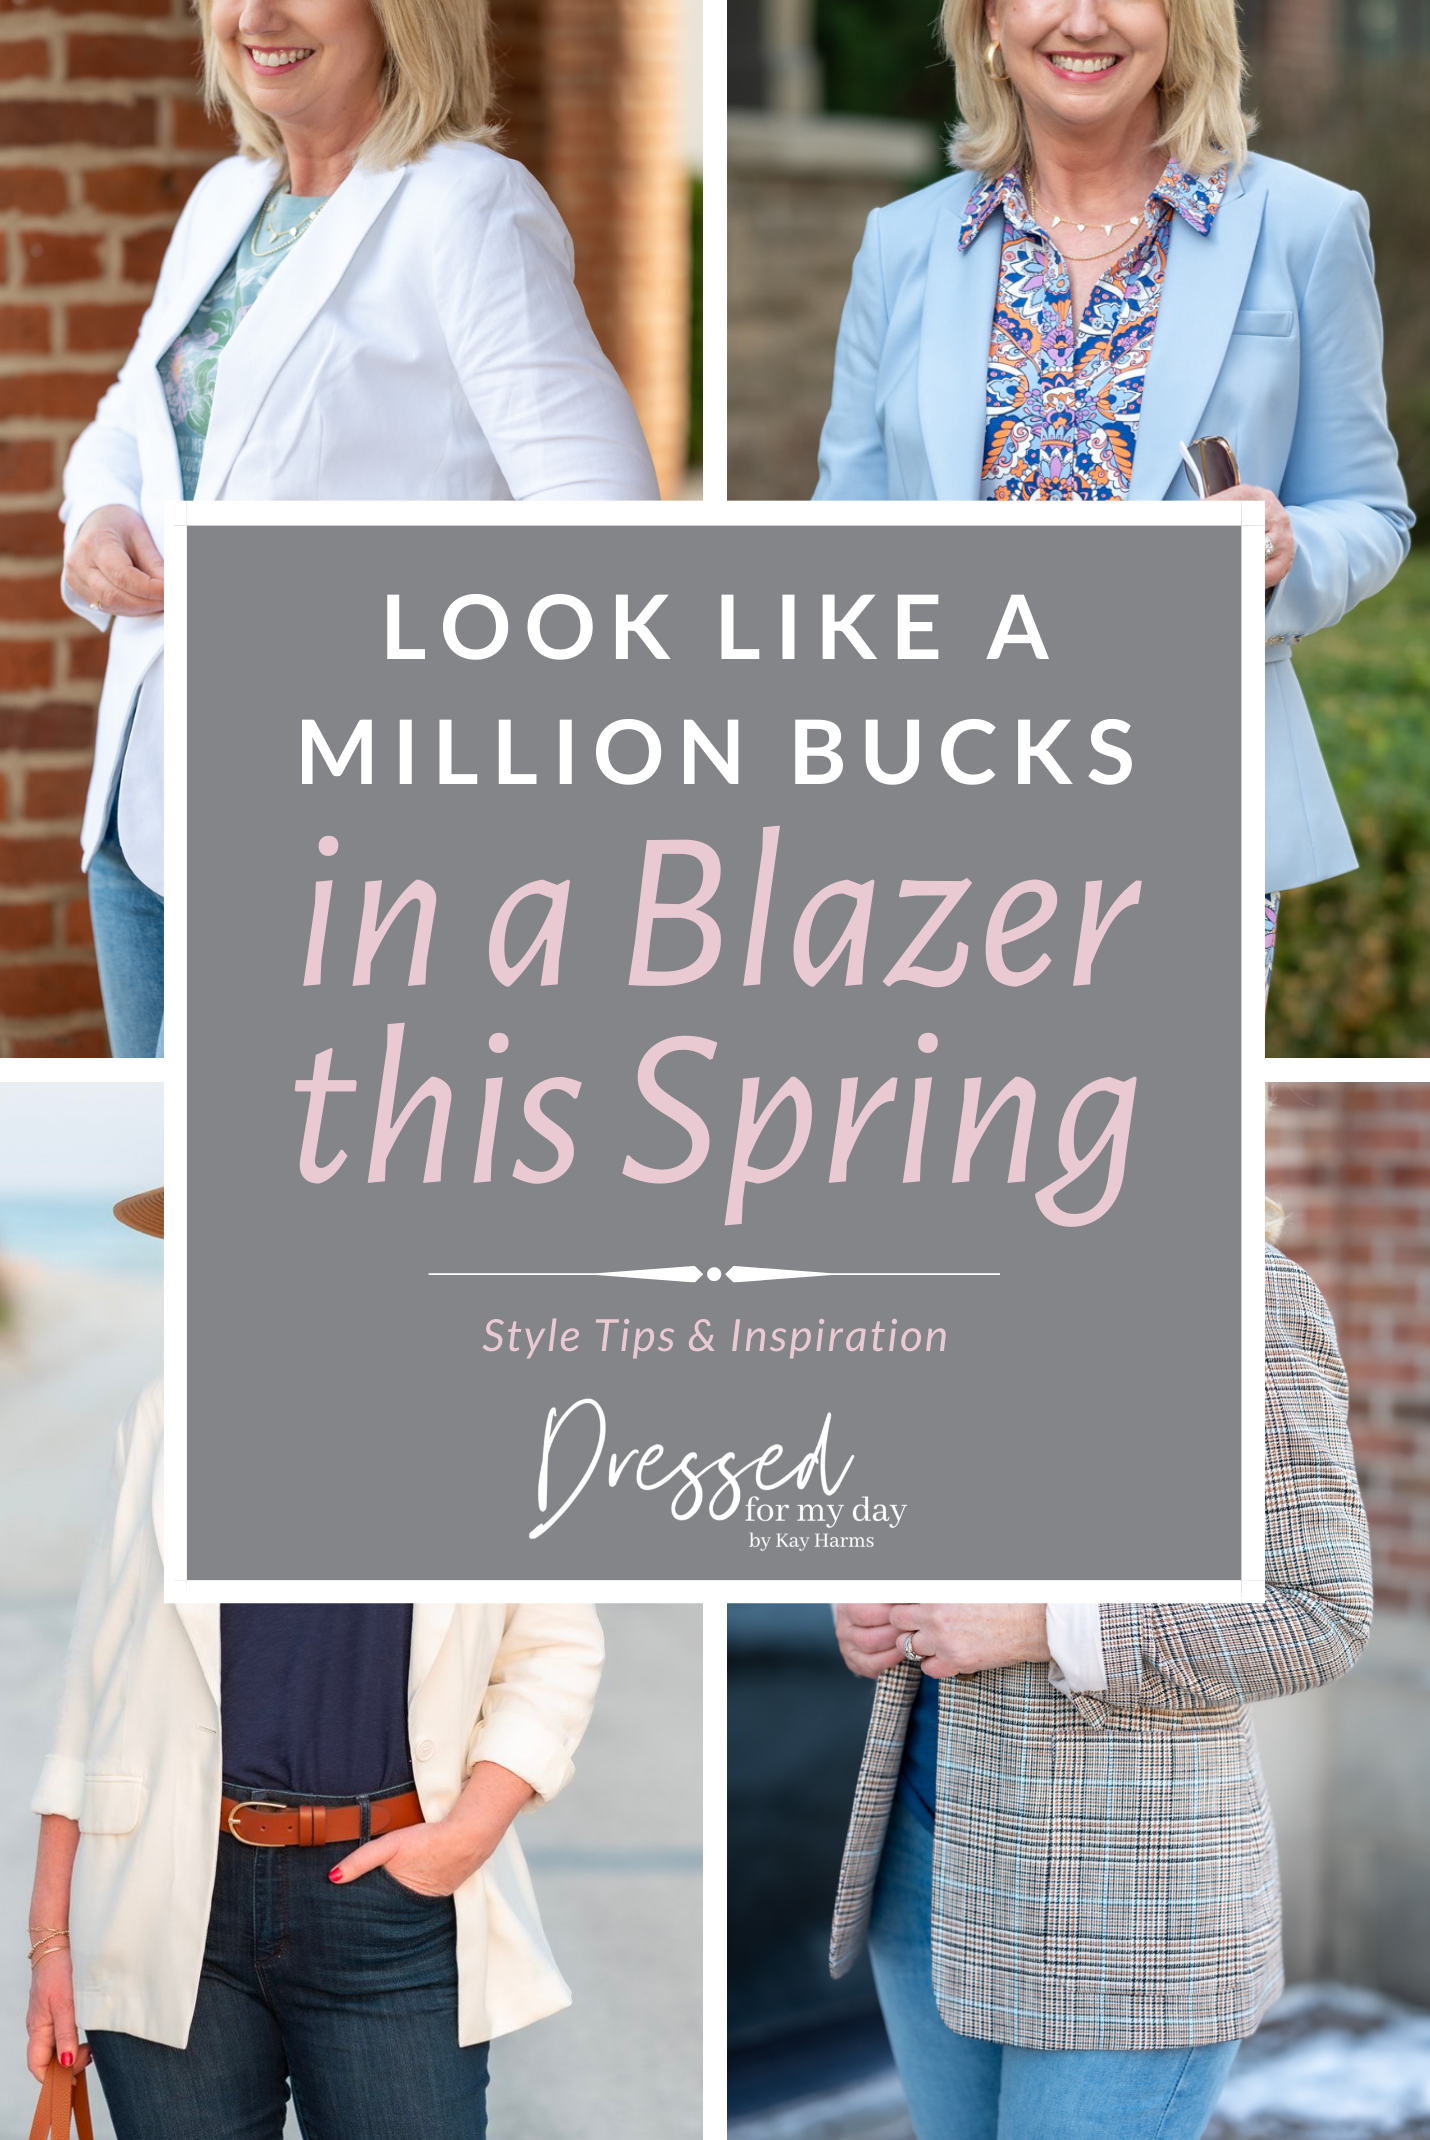 Look Like a Million Bucks in a Blazer this Spring